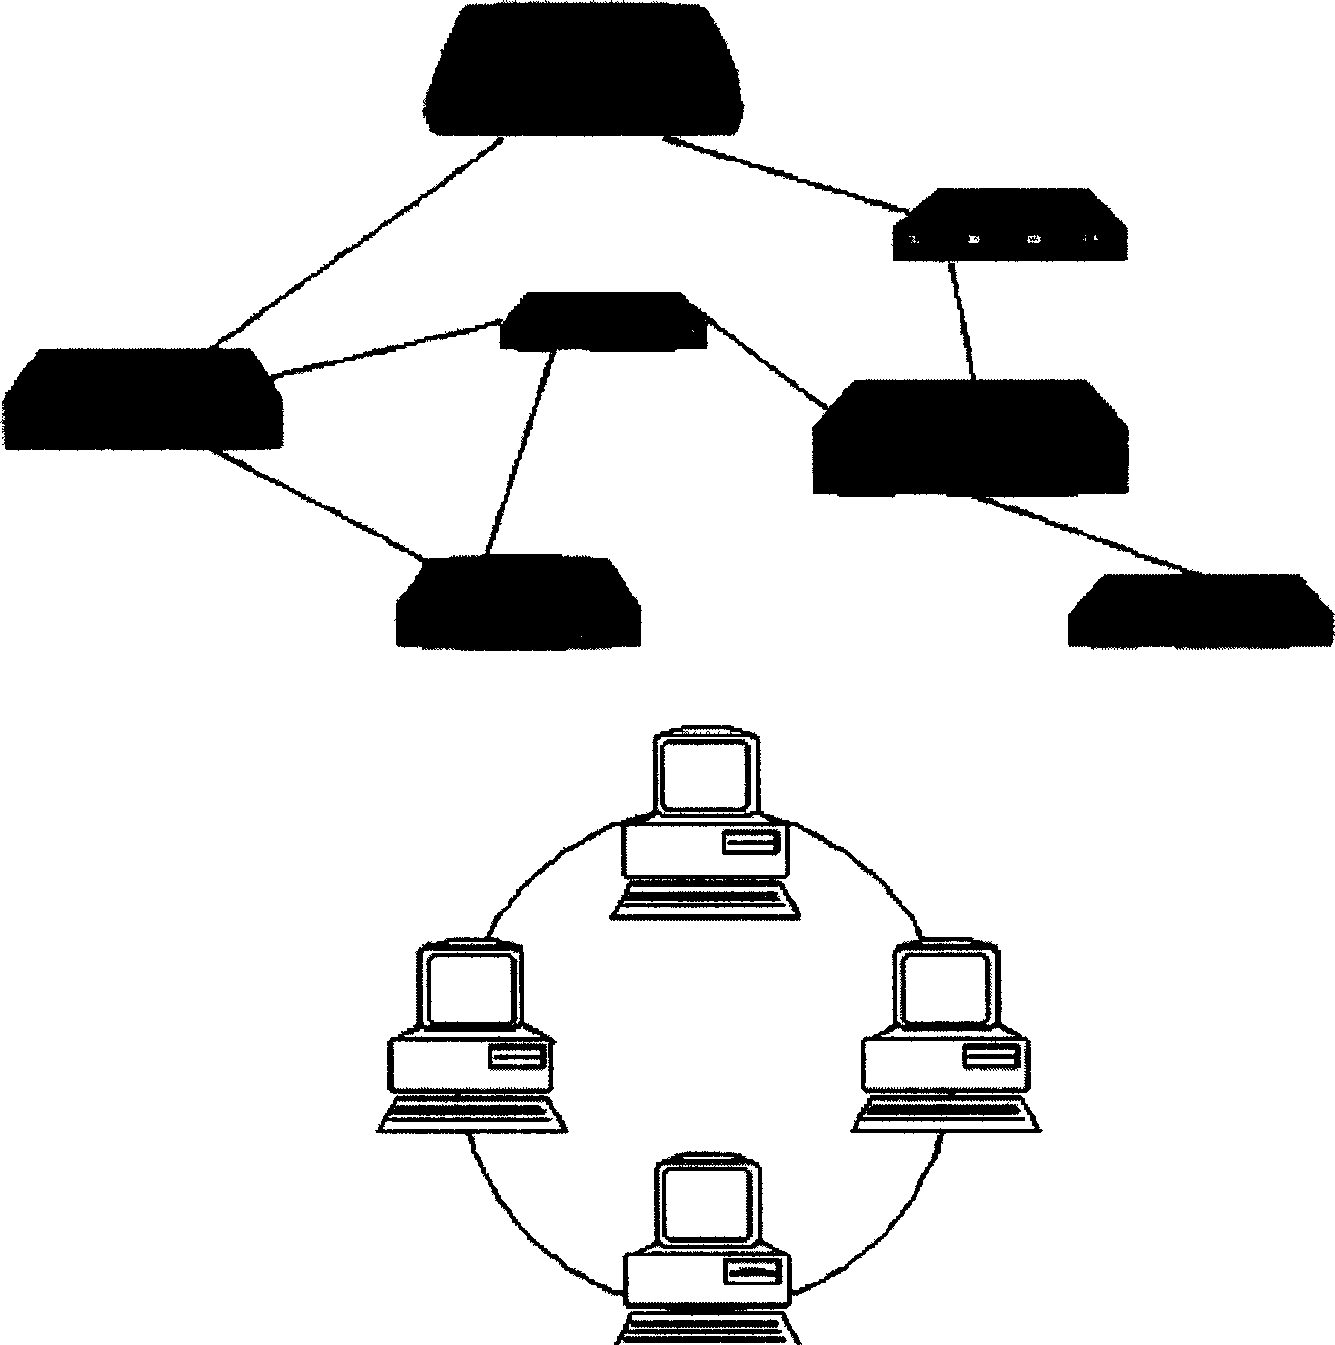 A routing method based on dynamic aggregation tree model